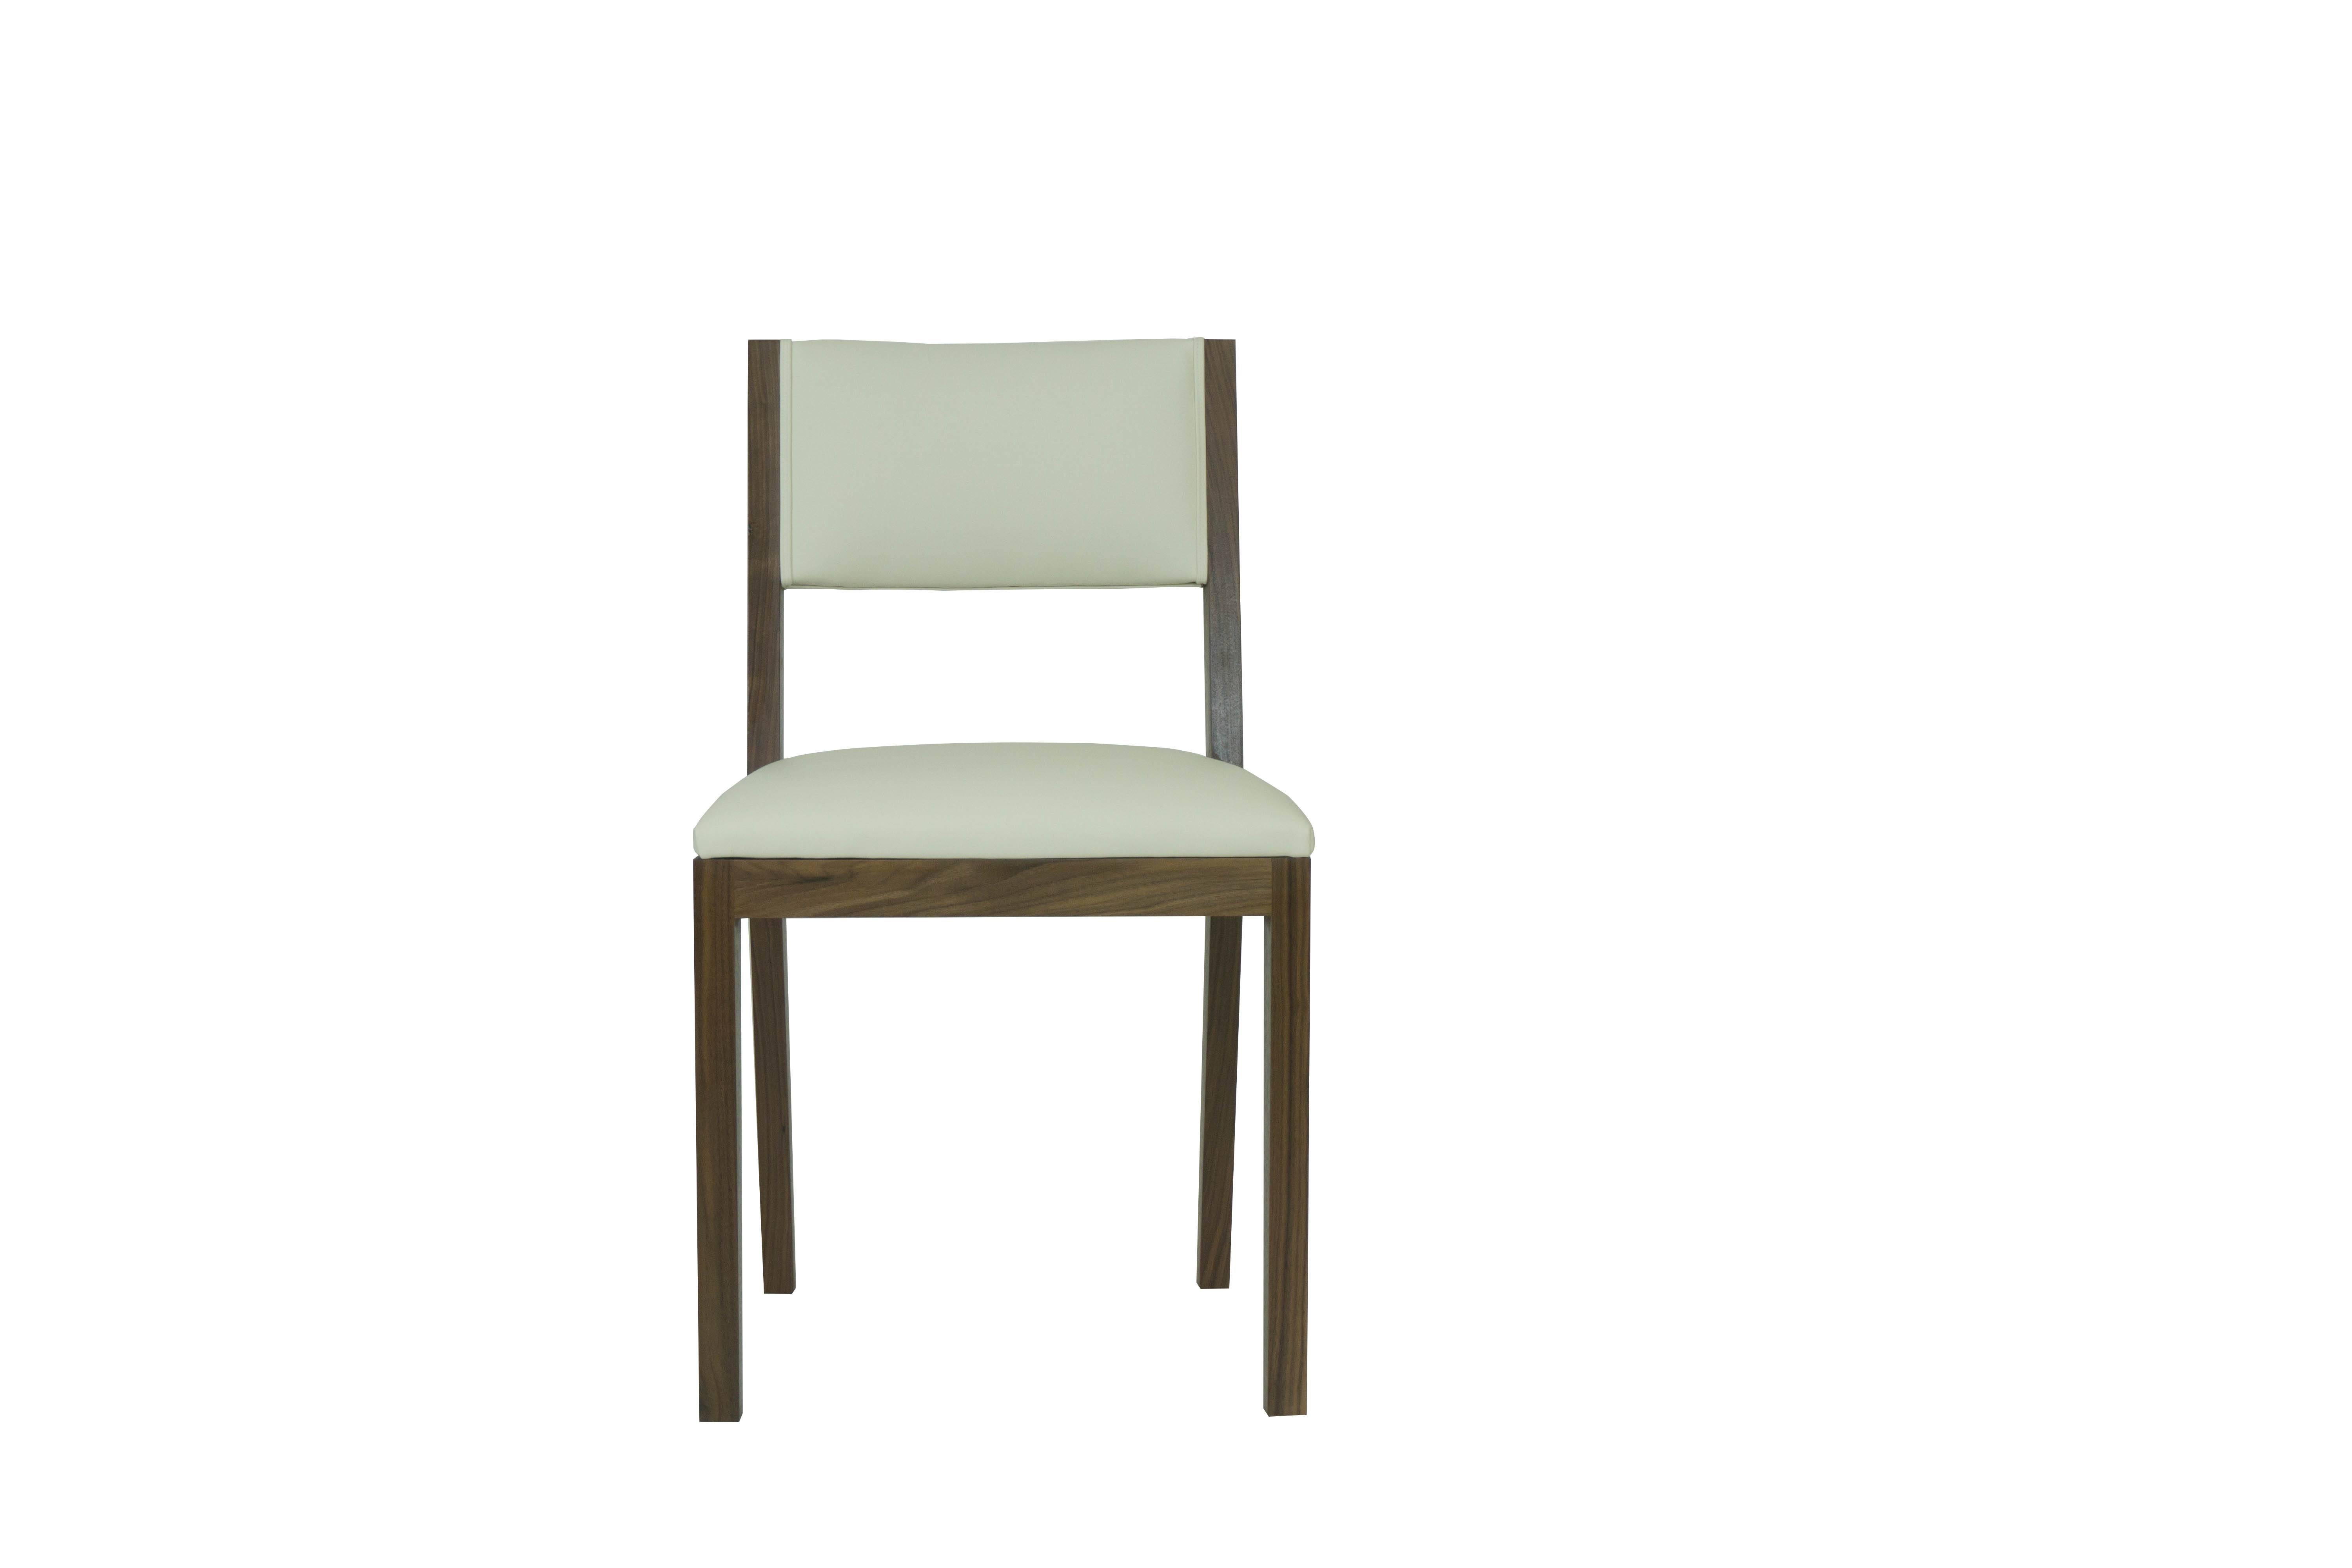 Built to order dining chairs with solid walnut frame with oil finish. High quality leather. Very durable design and materials, great for restaurants, hotels and in homes that host all the holidays. Our best dining chair for durability and our best